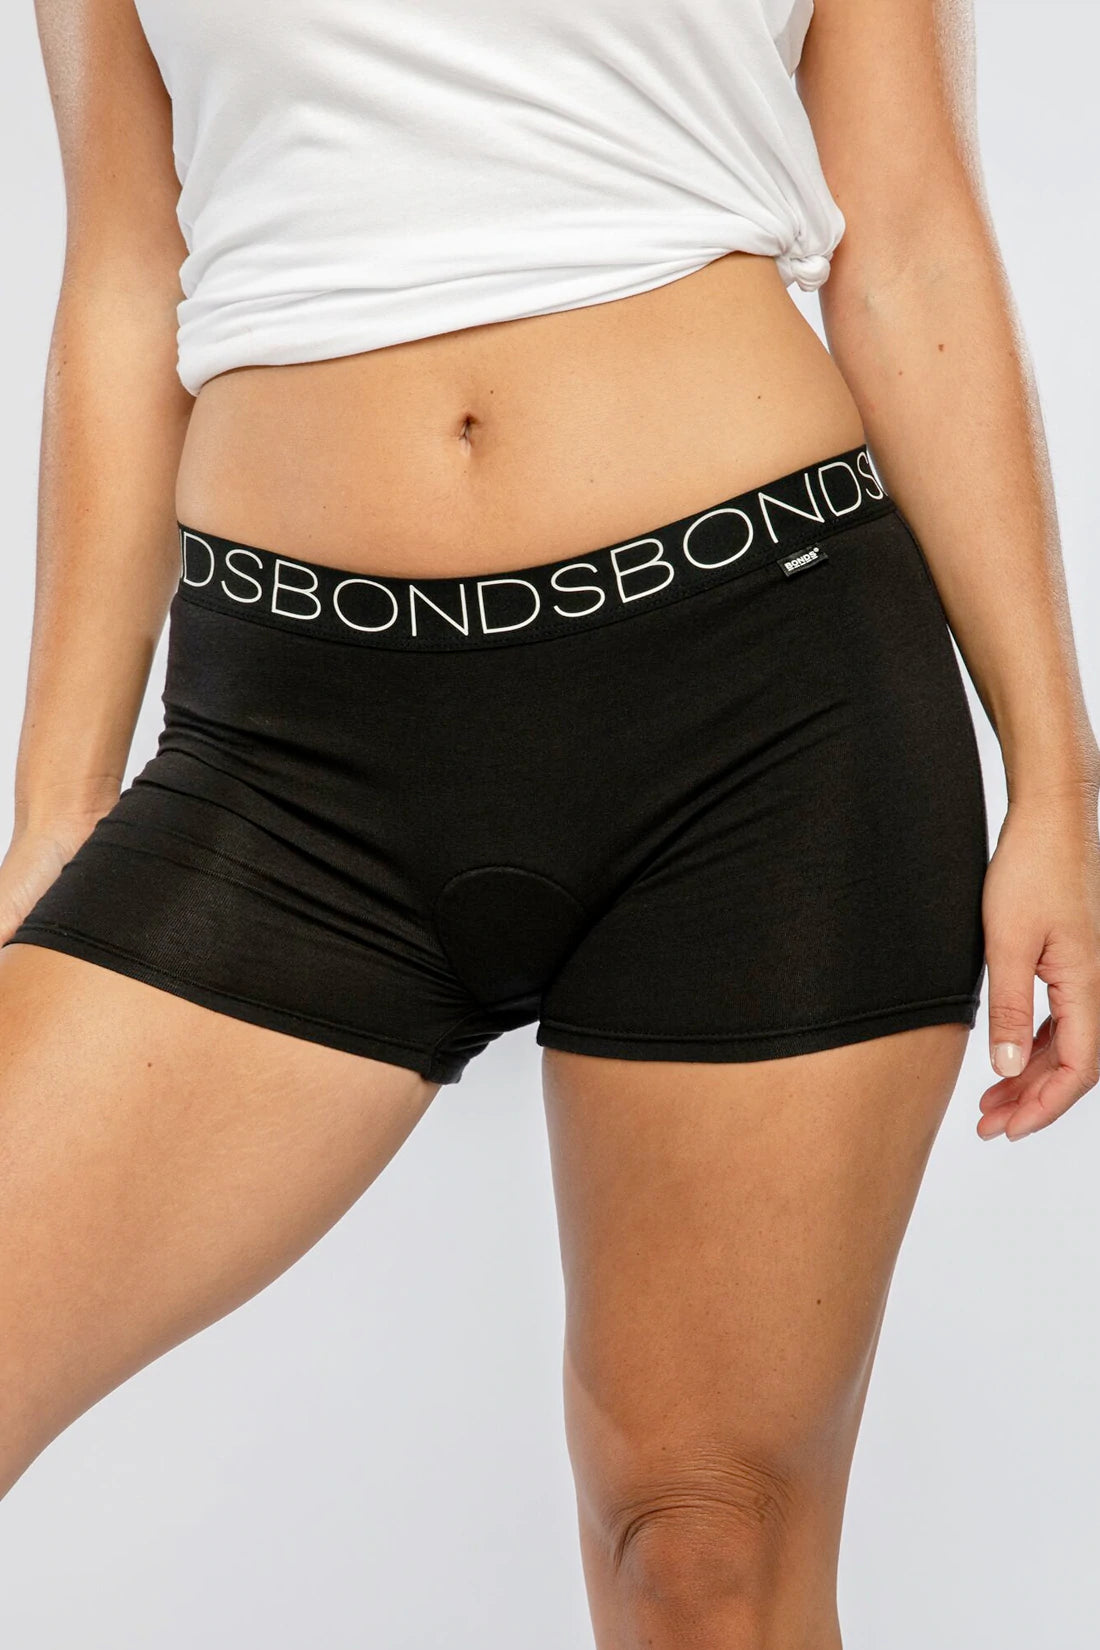 22 Pairs Of Boyshorts You Need In Your Underwear Drawer